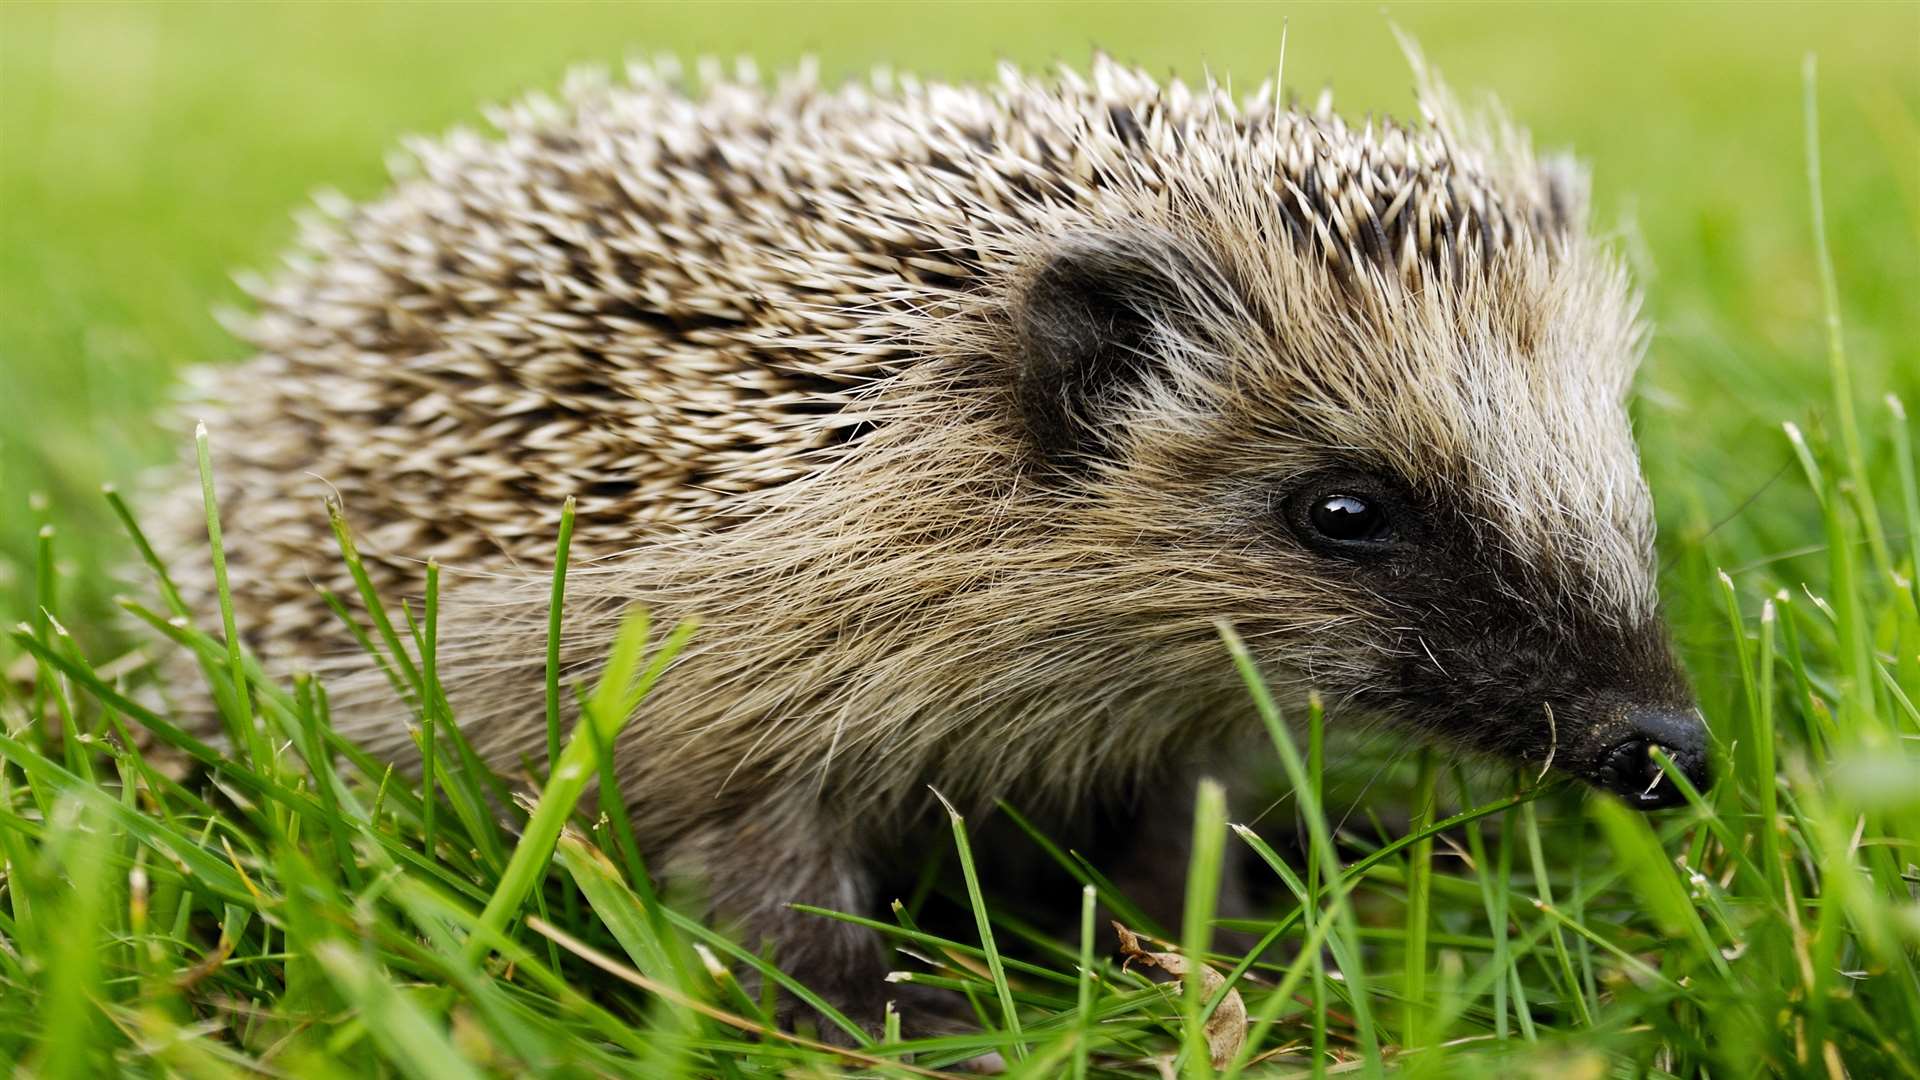 Kent has seen a decline in the number of hedgehogs